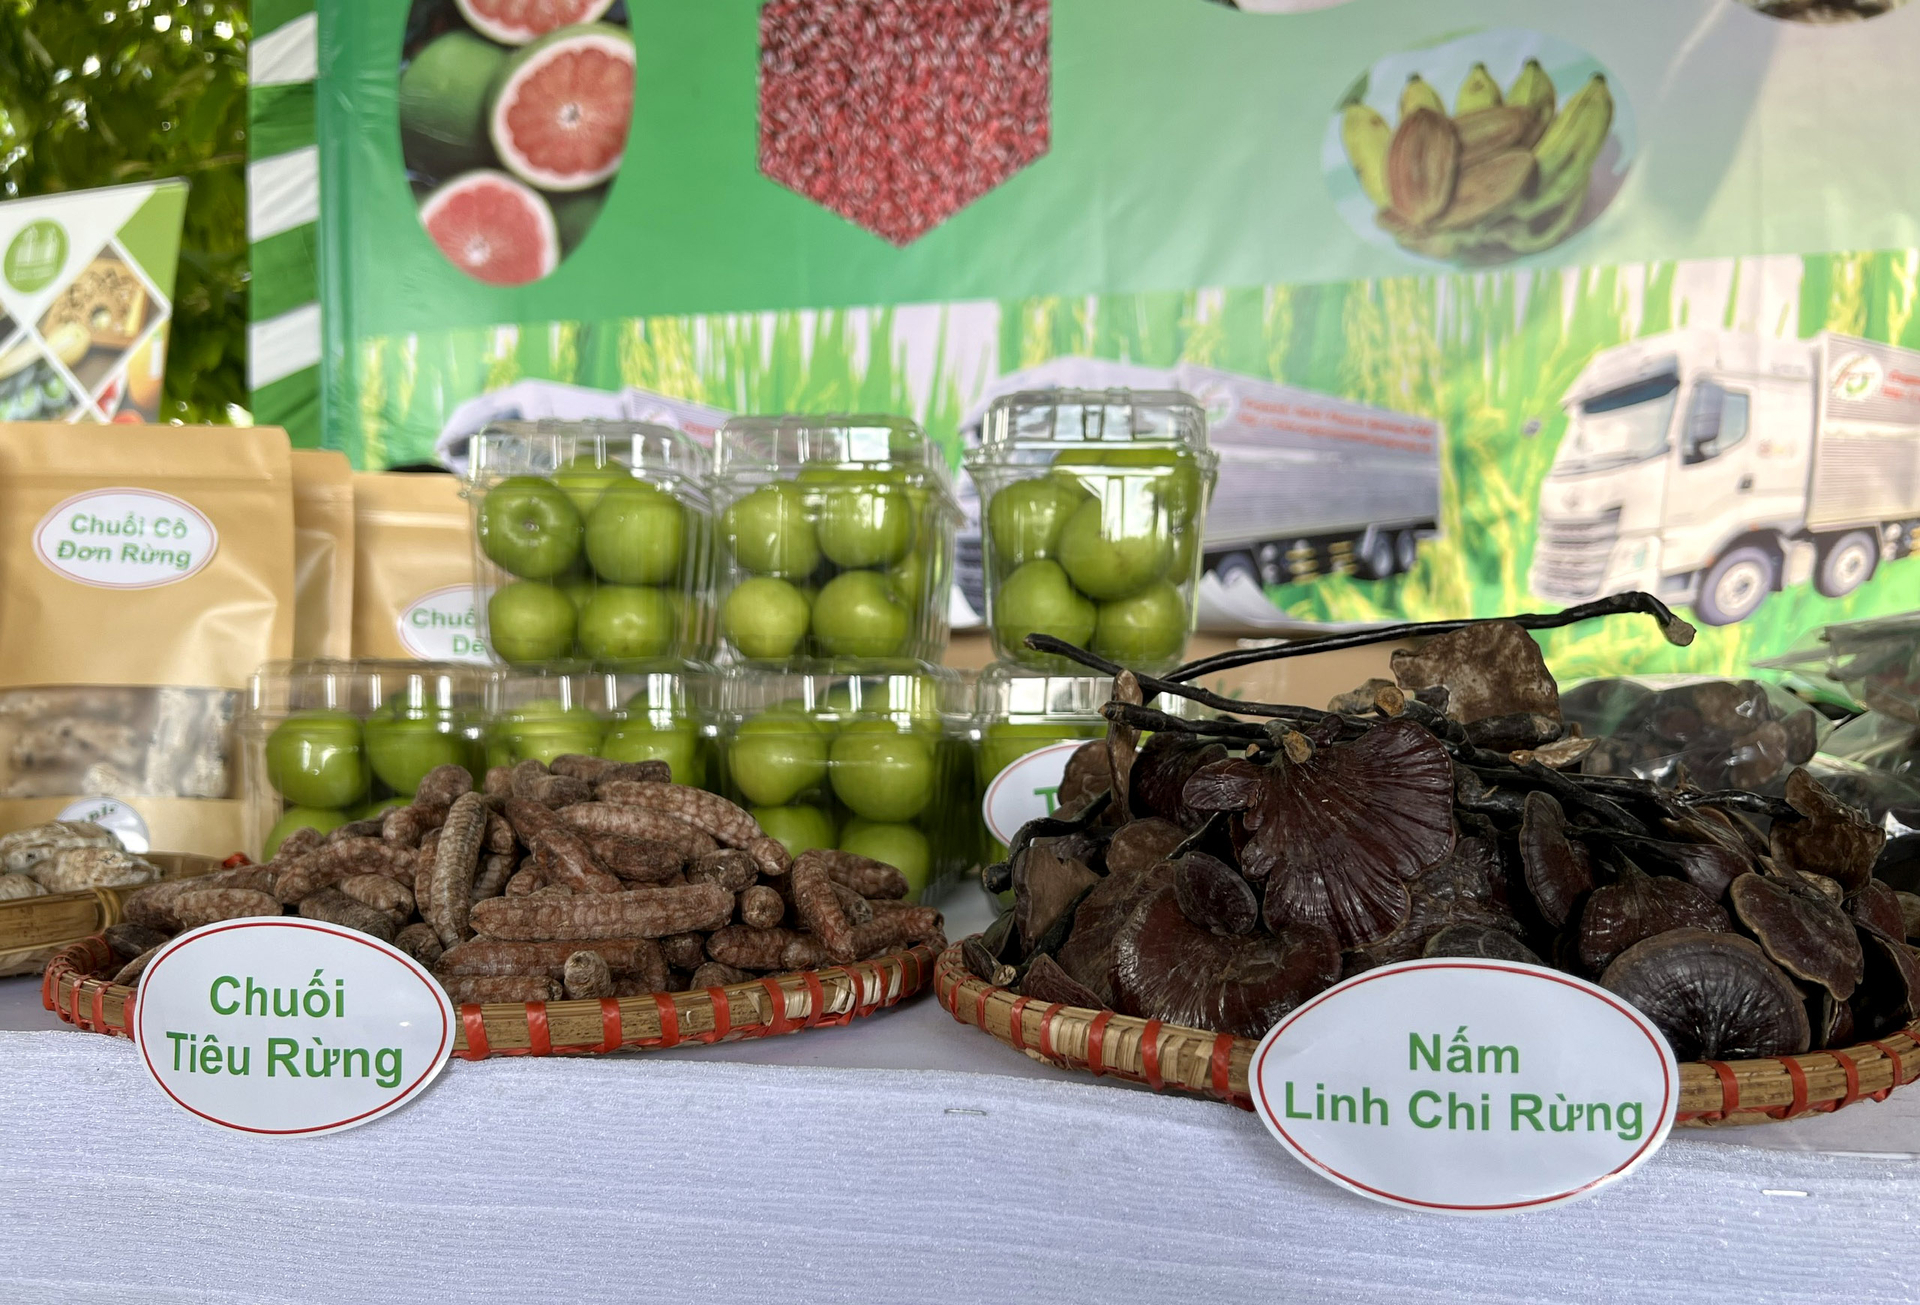 Pure natural products of Raglai people in Phuoc Binh commune, Bac Ai district, Ninh Thuan. Photo: Son Trang.